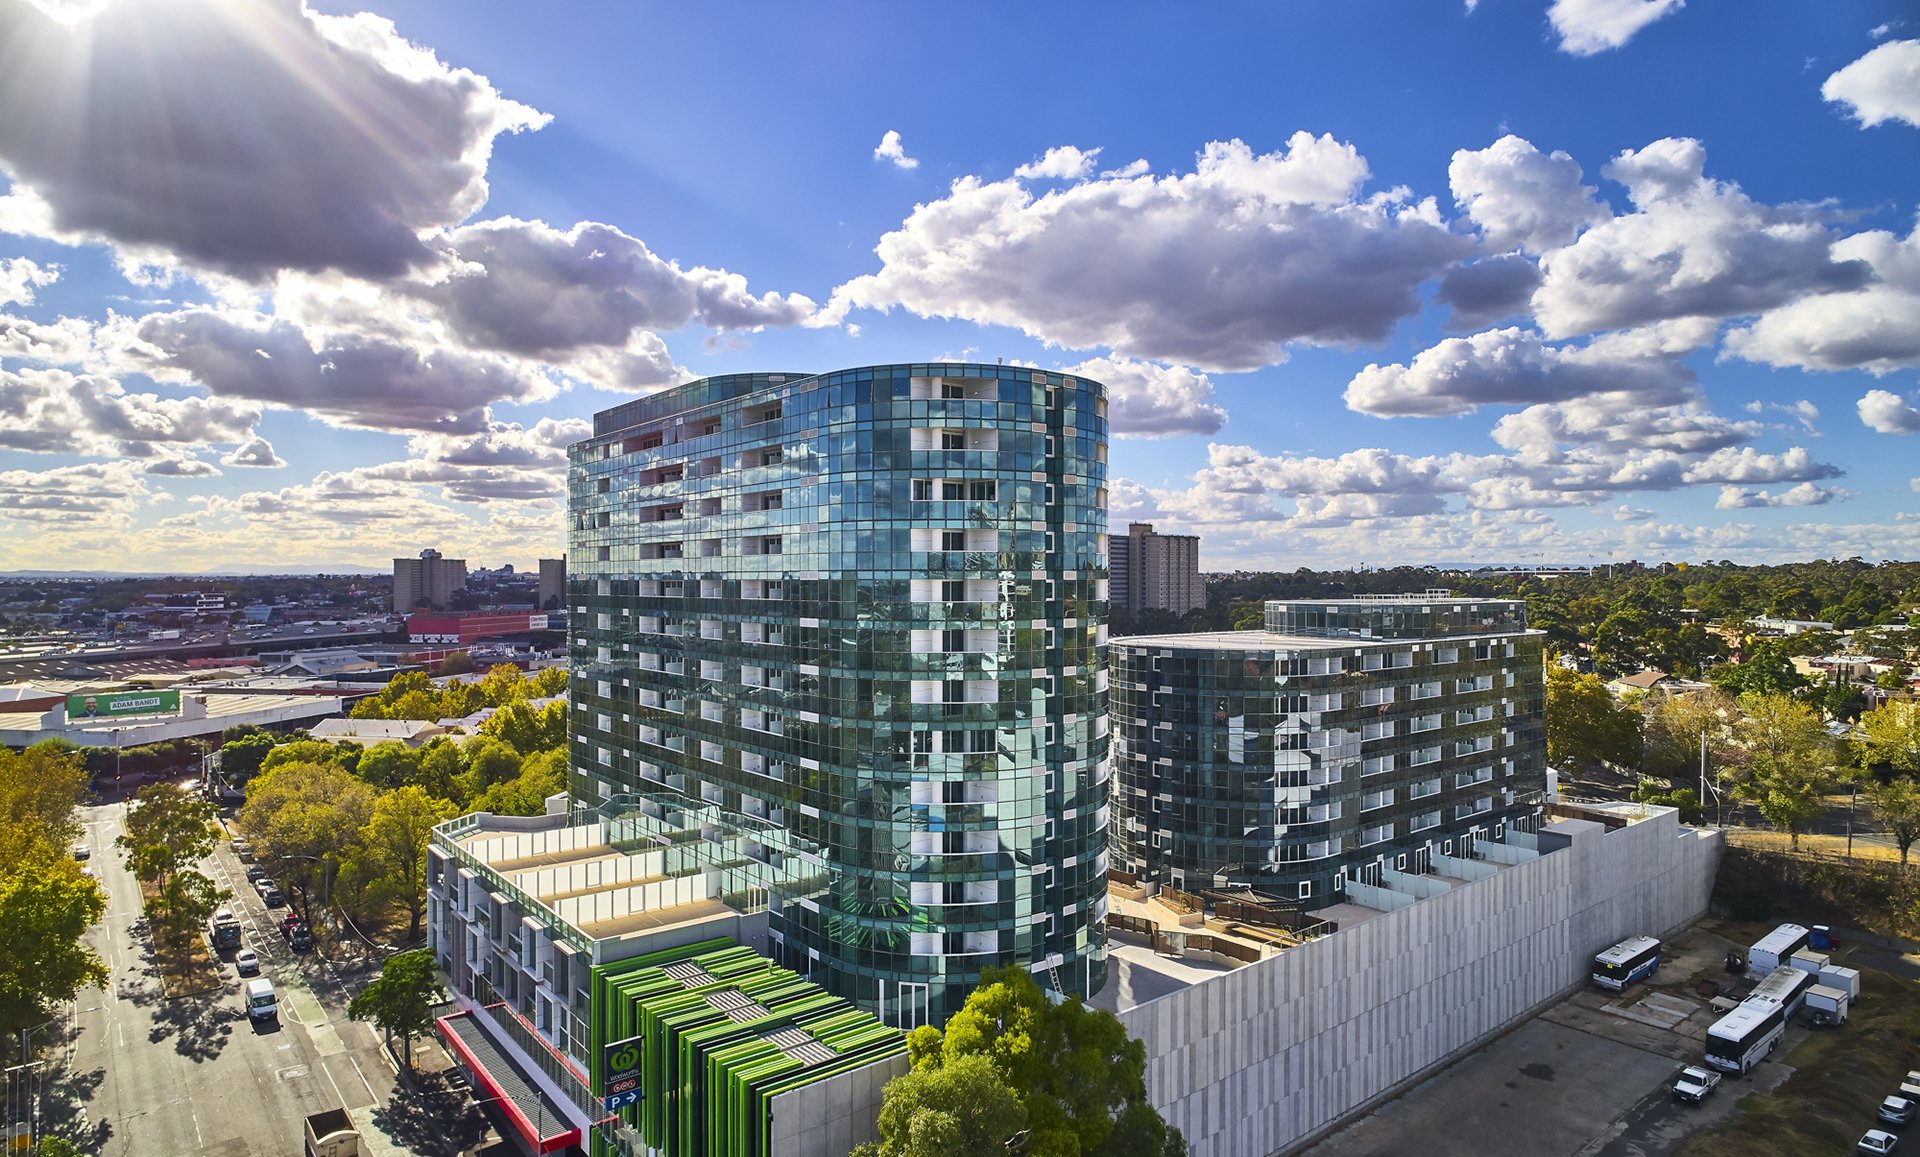 North Melbourne - Arden Gardens - 101-117 Canning Street, North Melbourne, VIC 3051 - Townly - 14.jpg